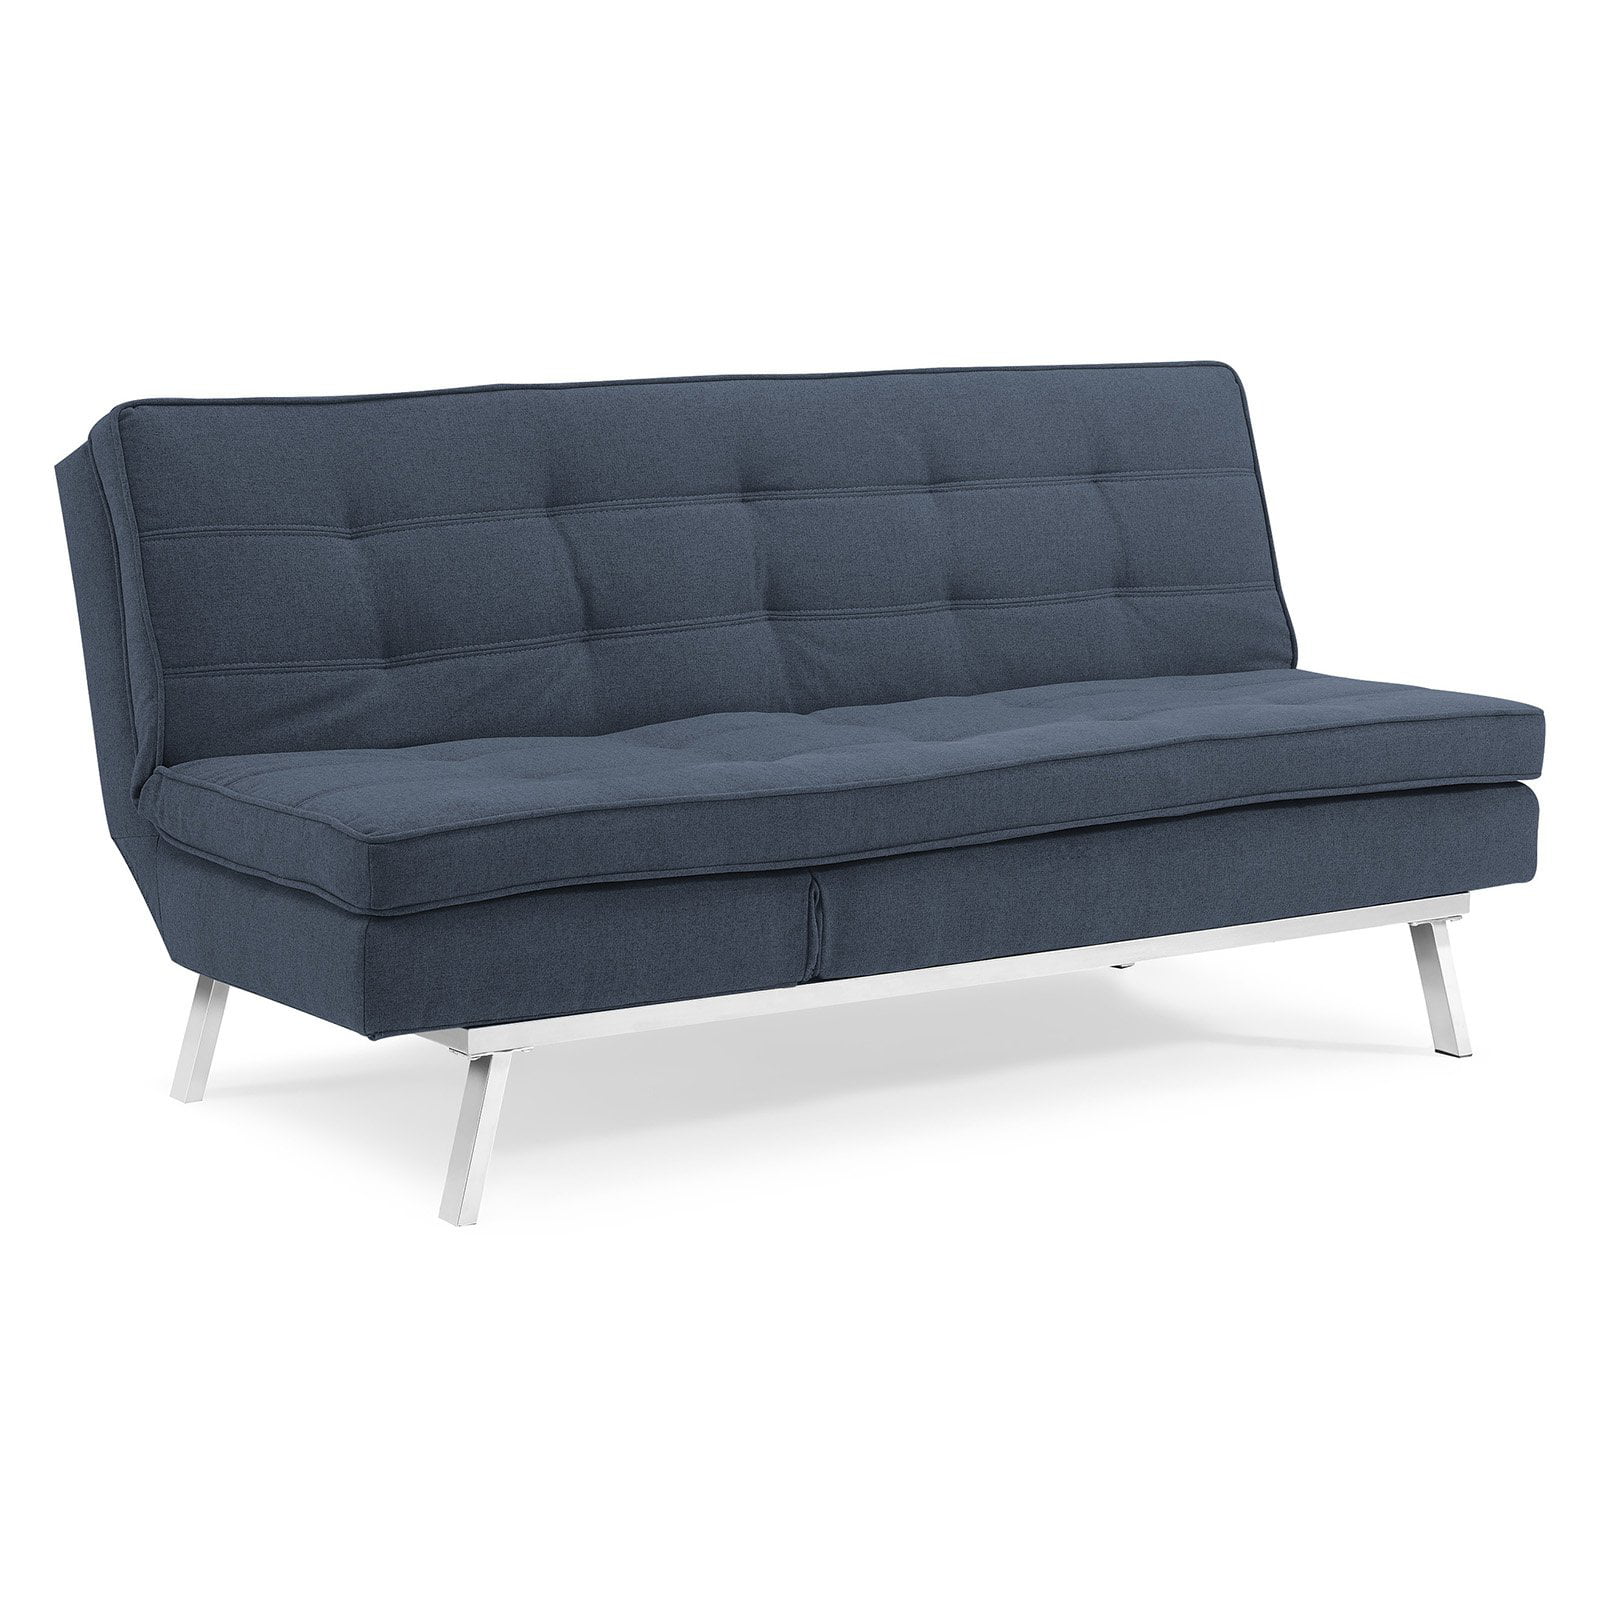 Sealy Lawrence Splitback Convertible Sofa with 5 Position